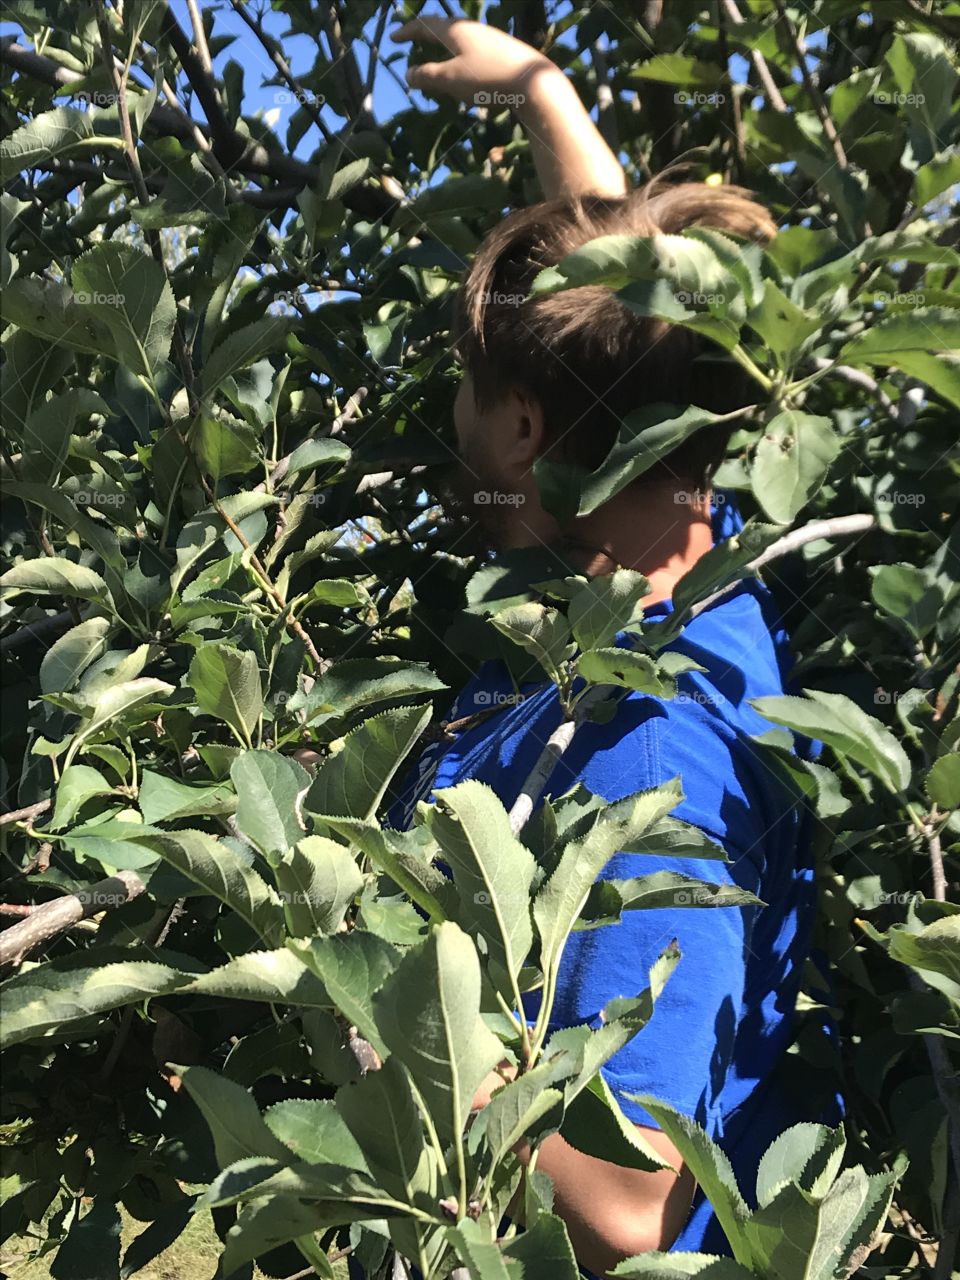 Man apple picking in orchard hidden by leaves